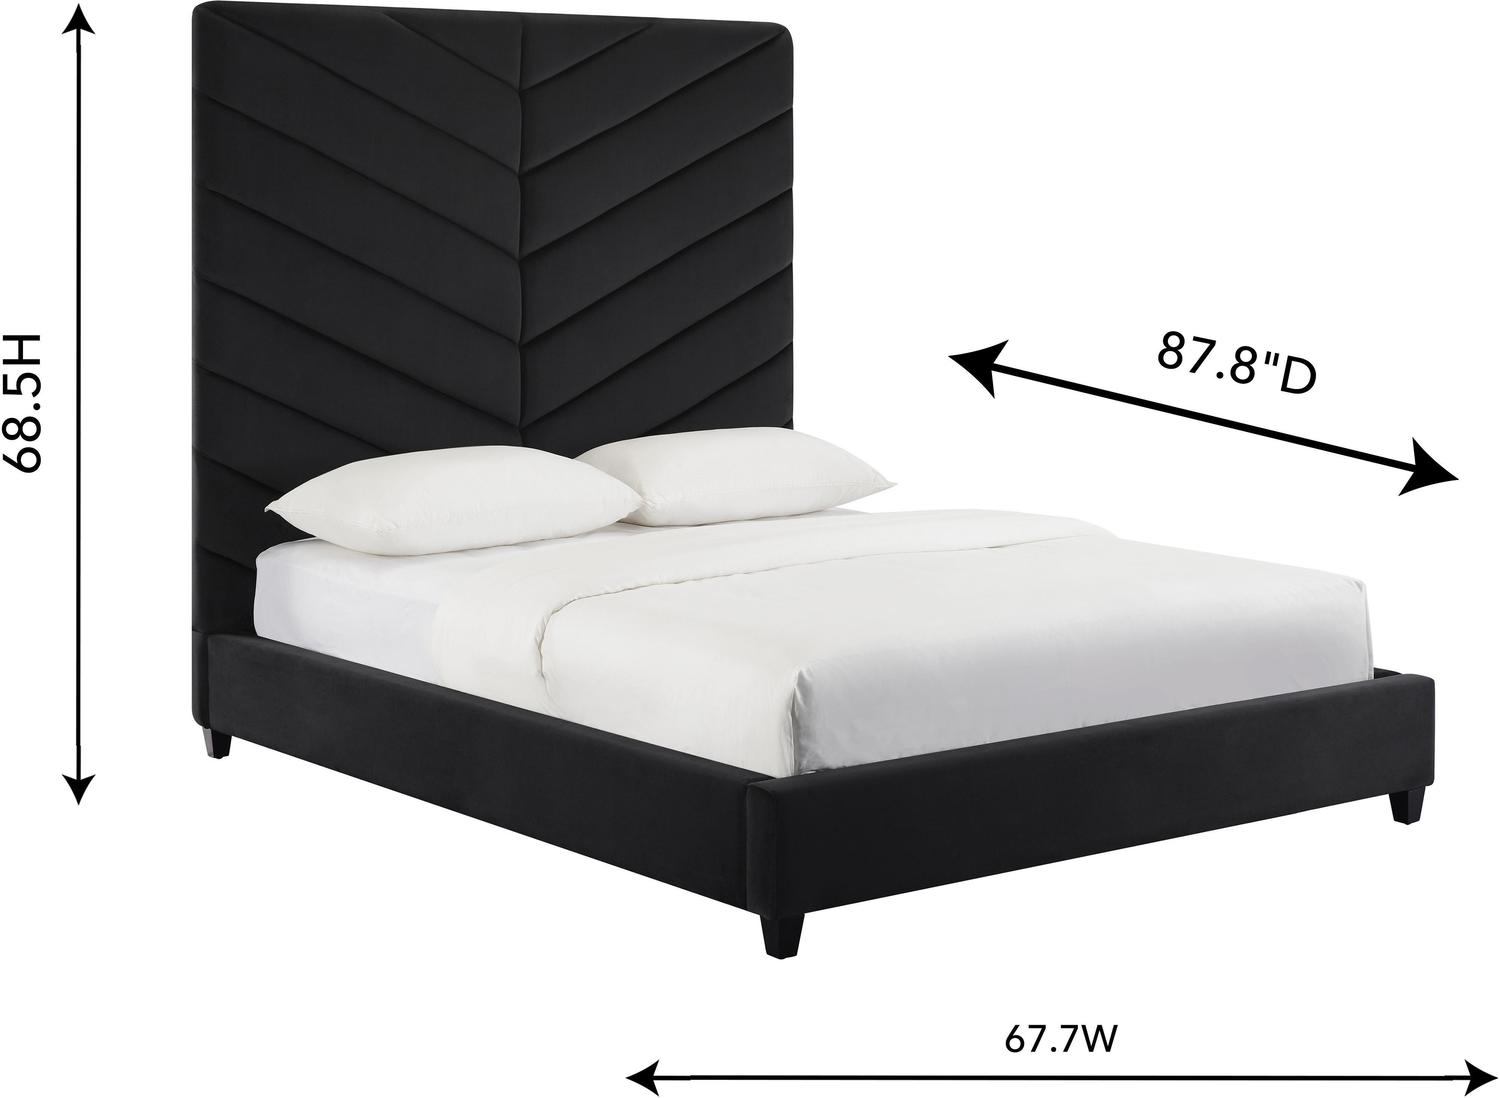 high bed frame queen with headboard Contemporary Design Furniture Beds Black